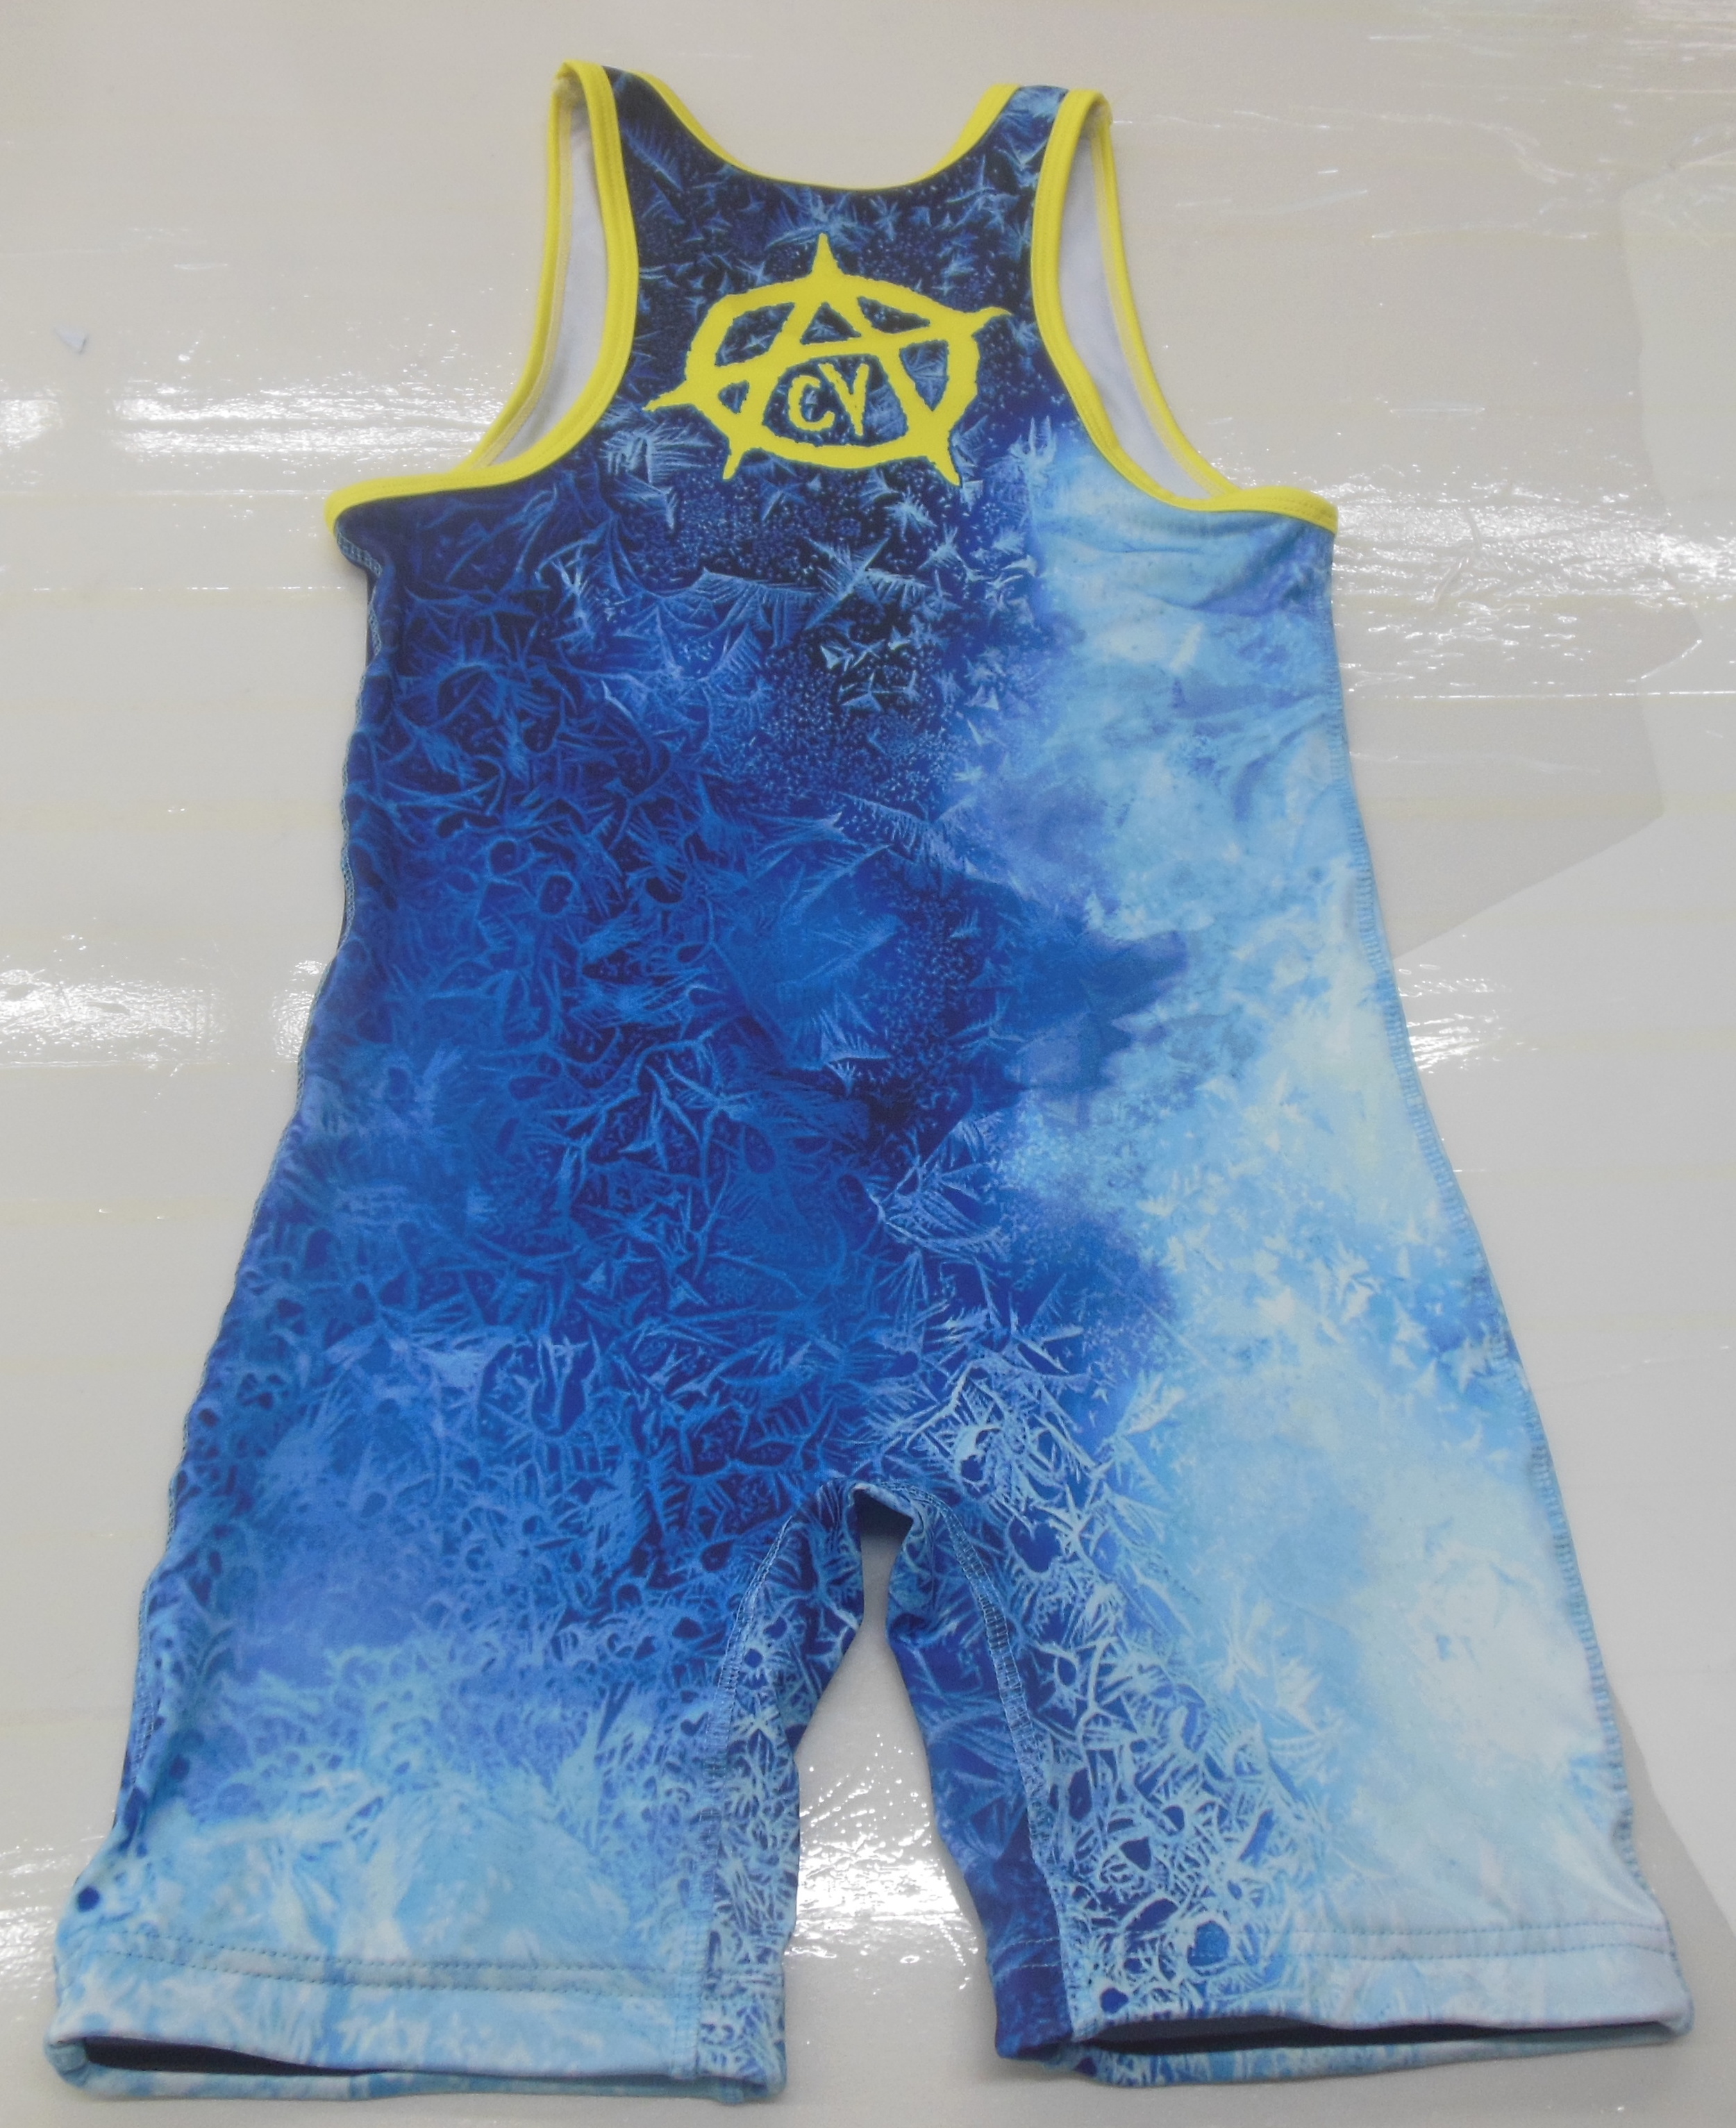 CV Sky Blue Yellow Blue and White Baseball Uniforms, Kids Swimming Suits